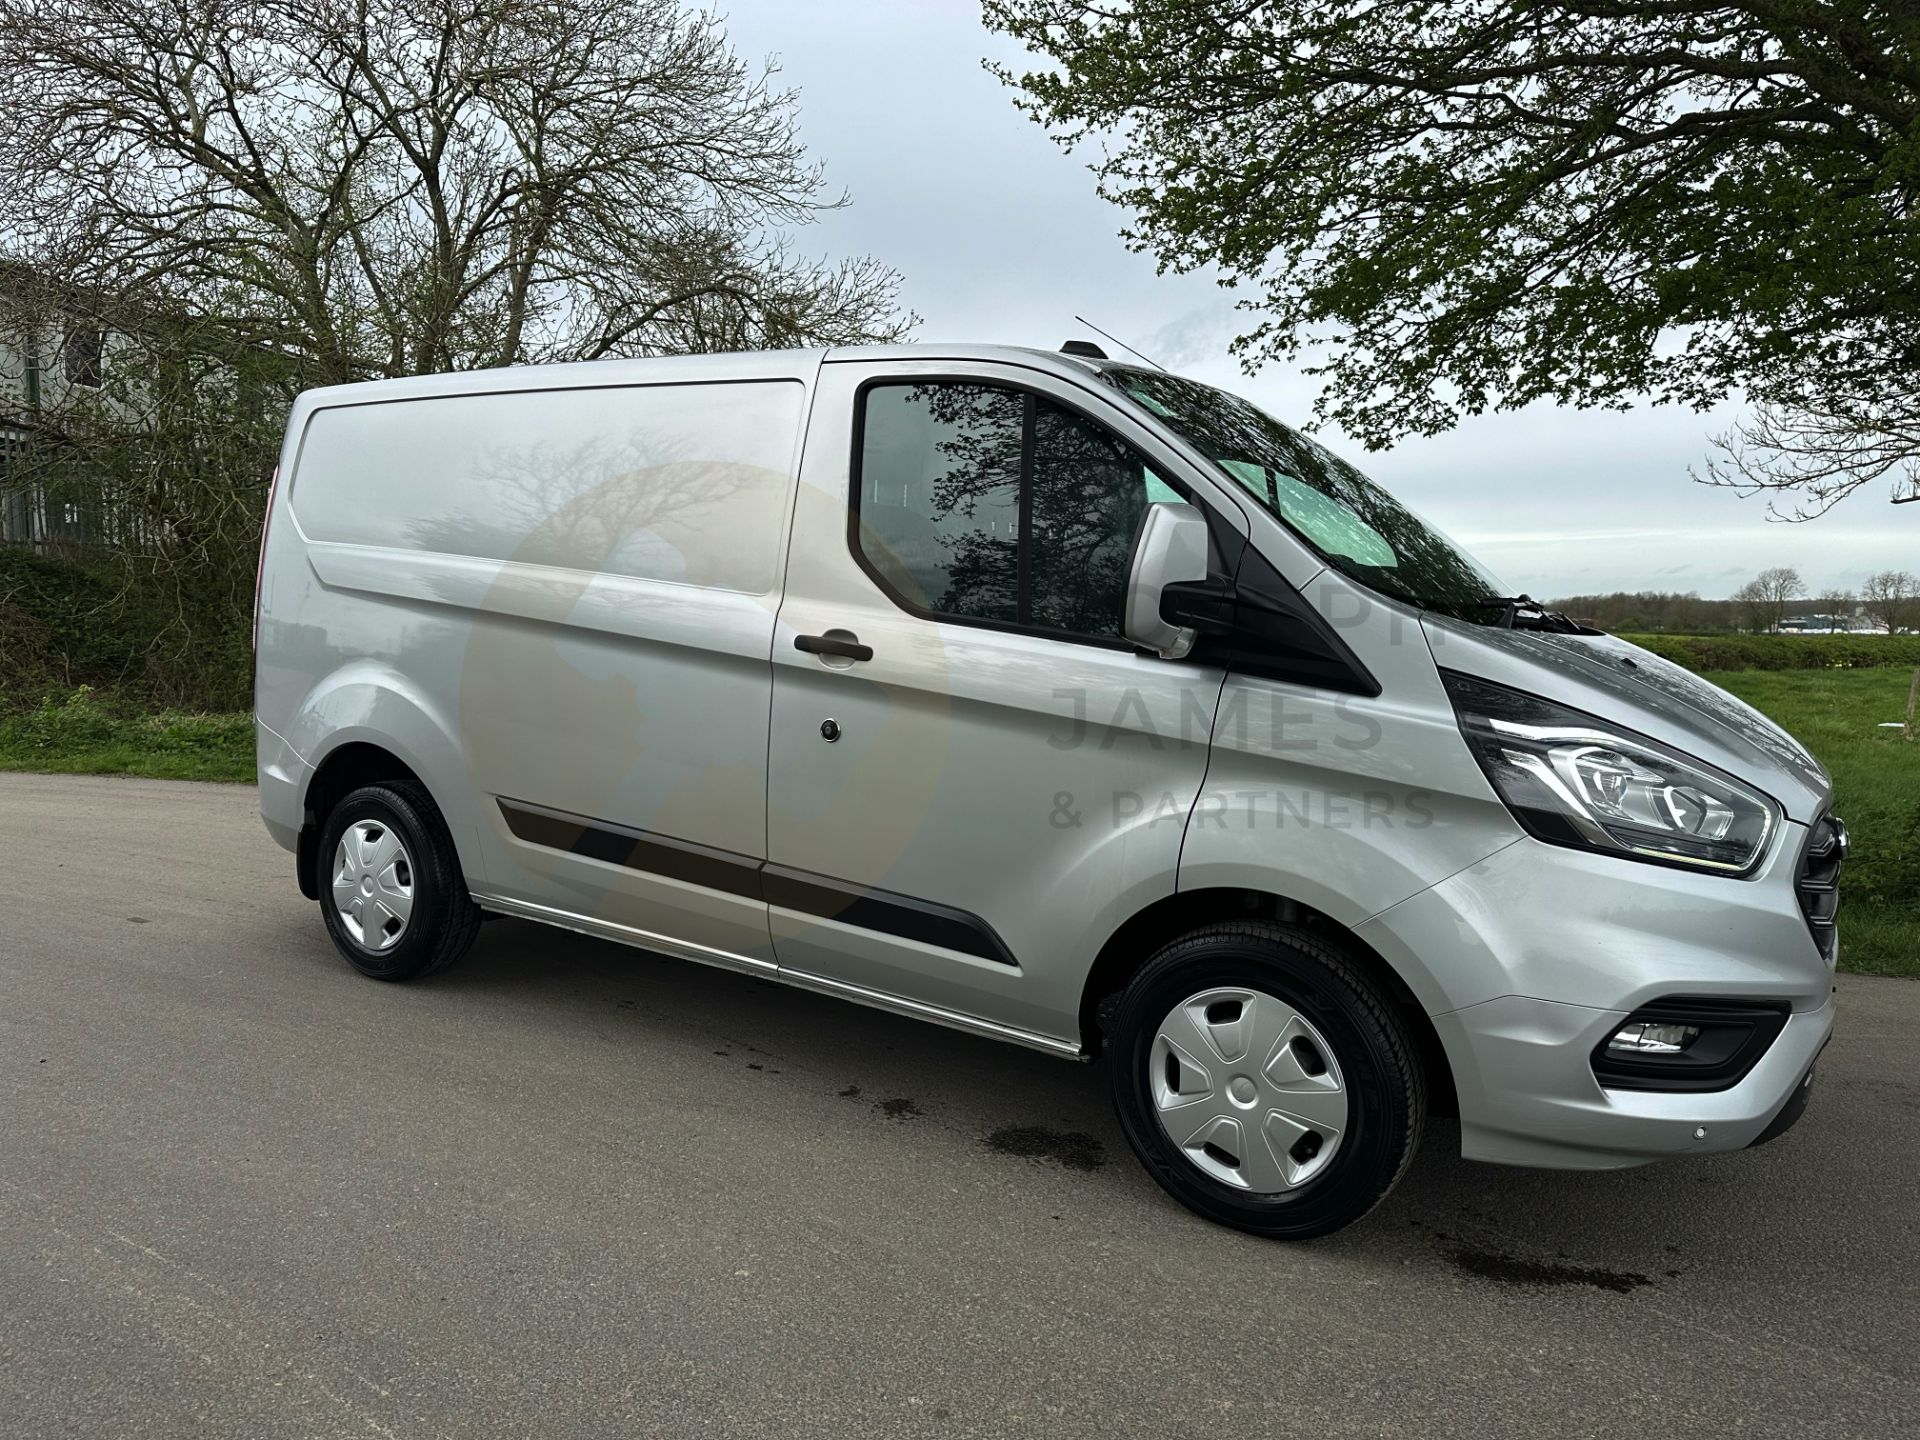 FORD TRANSIT CUSTOM "TREND" 2.0TDCI (130) 20 REG -1 OWNER- SILVER -GREAT SPEC -LOW MILEAGE - Image 2 of 38